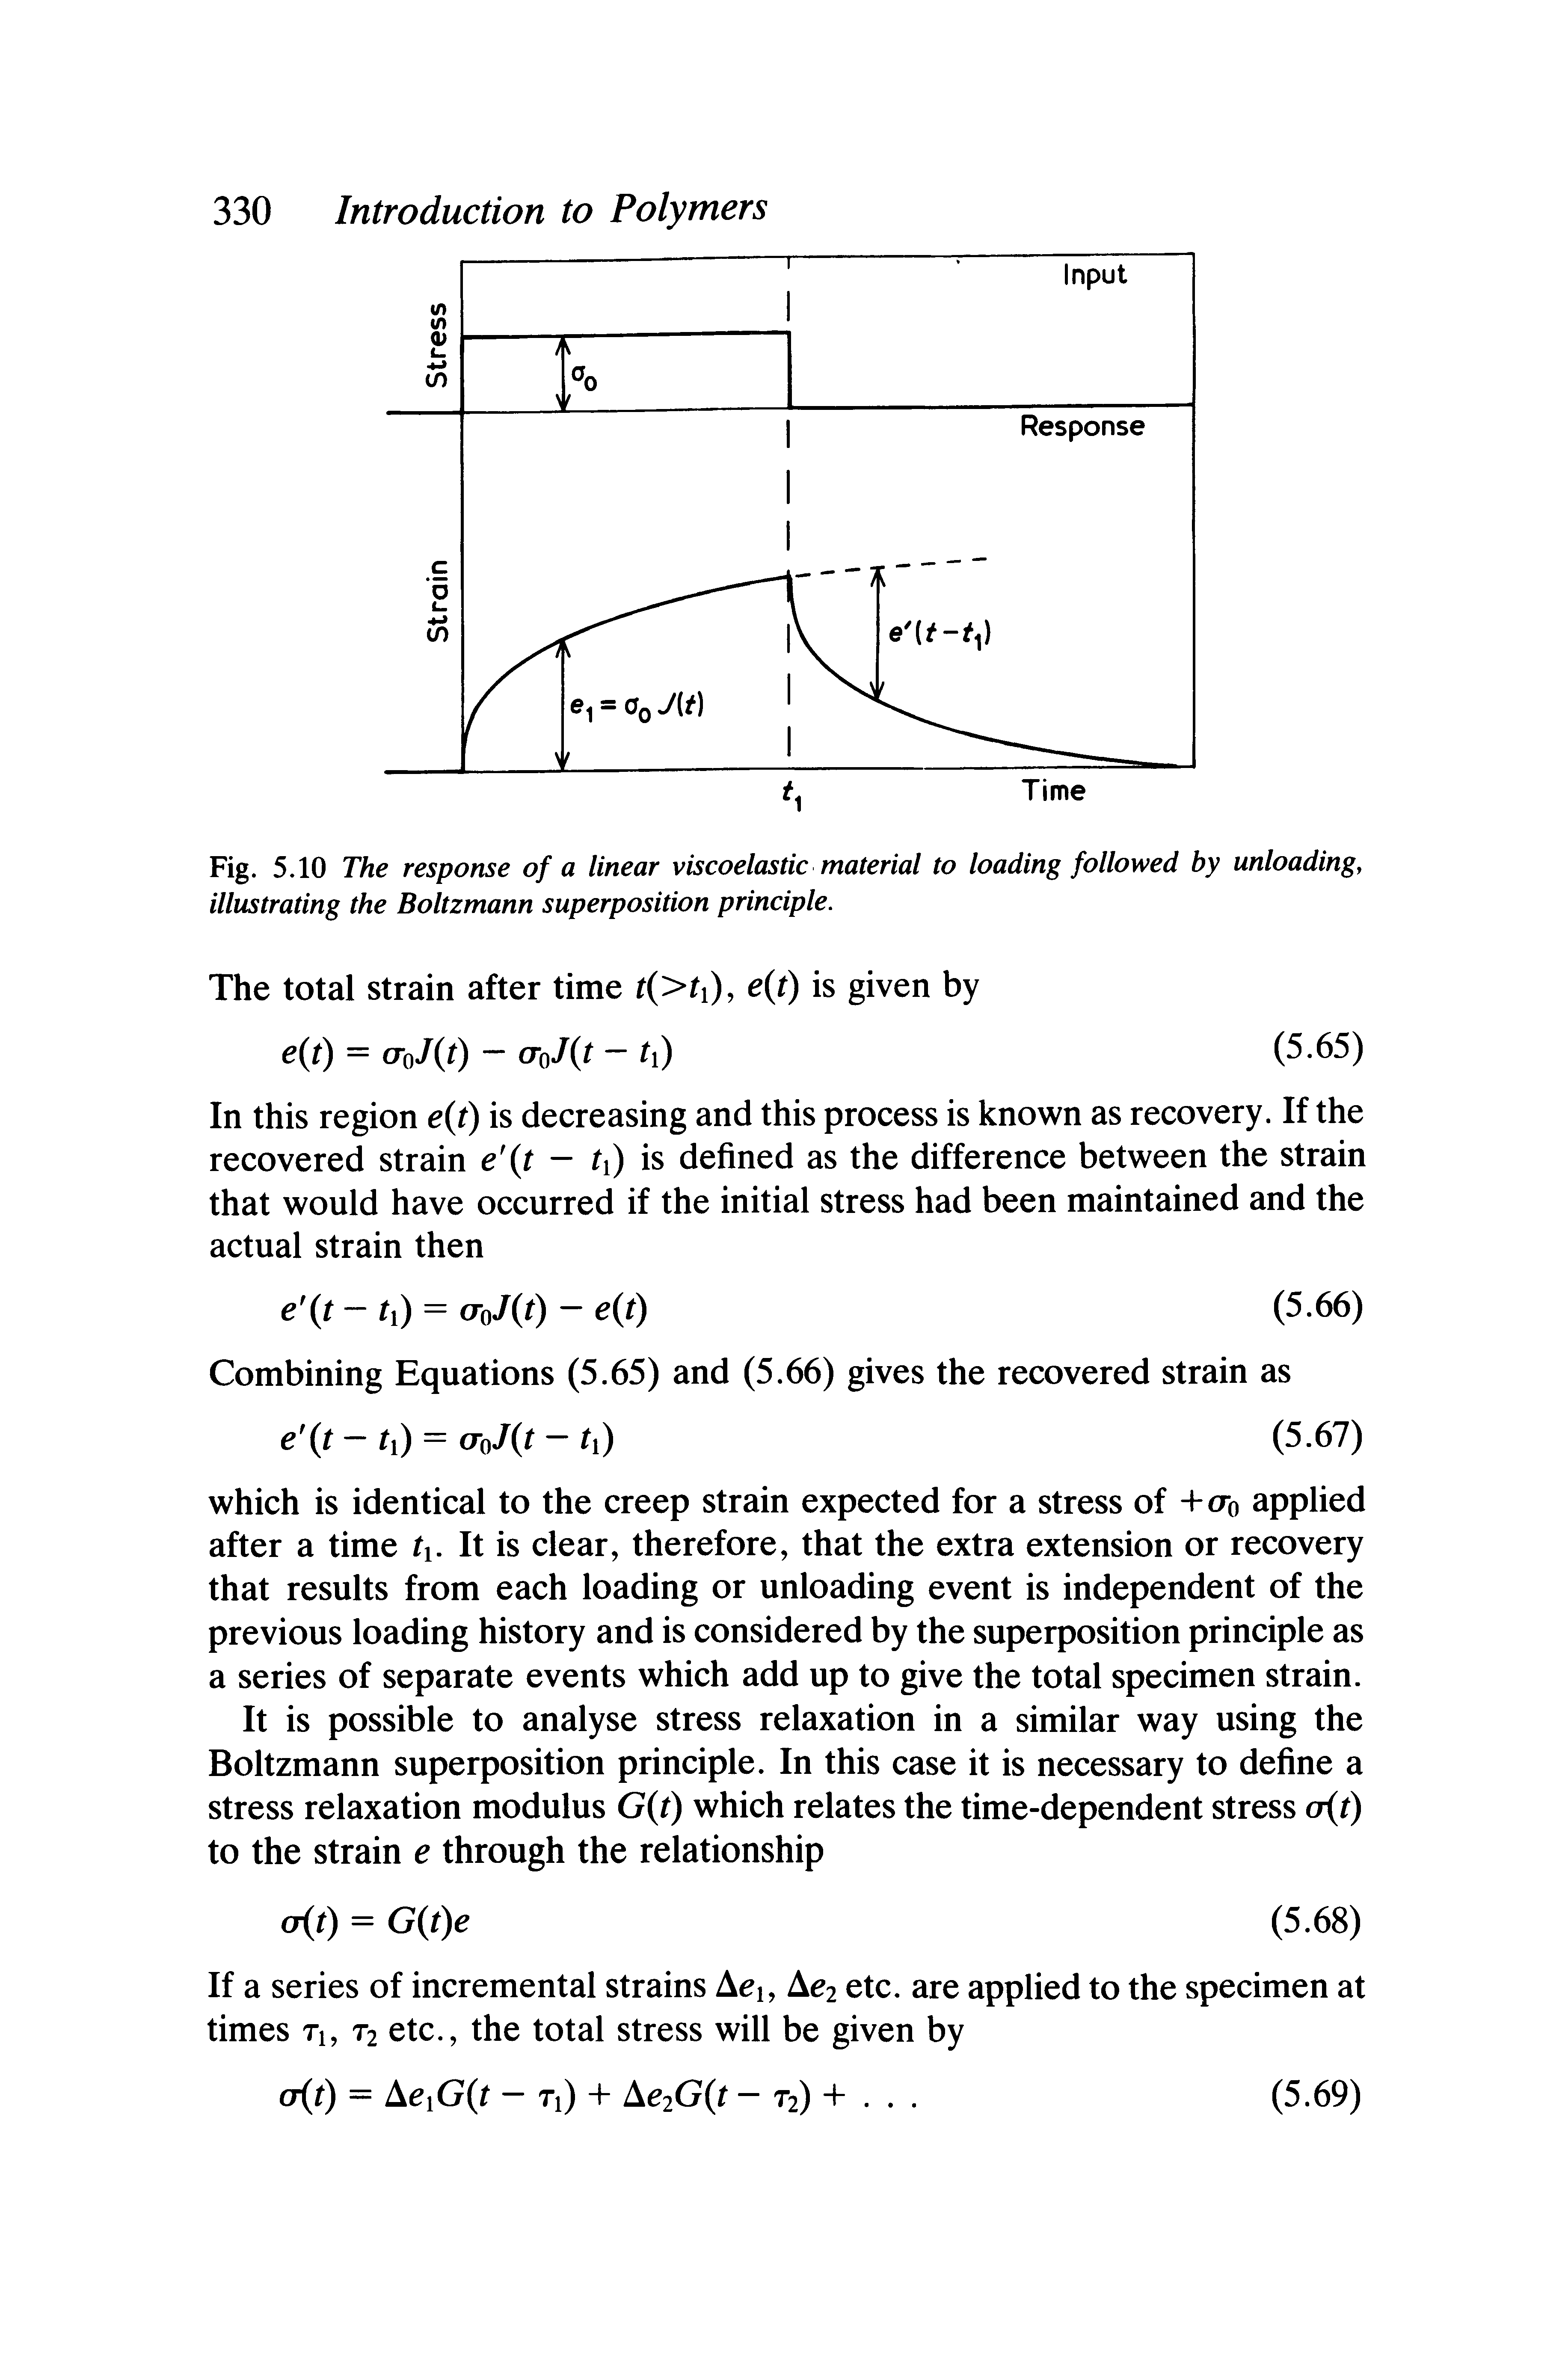 Fig. 5.10 The response of a linear viscoelastic material to loading followed by unloading, illustrating the Boltzmann superposition principle.